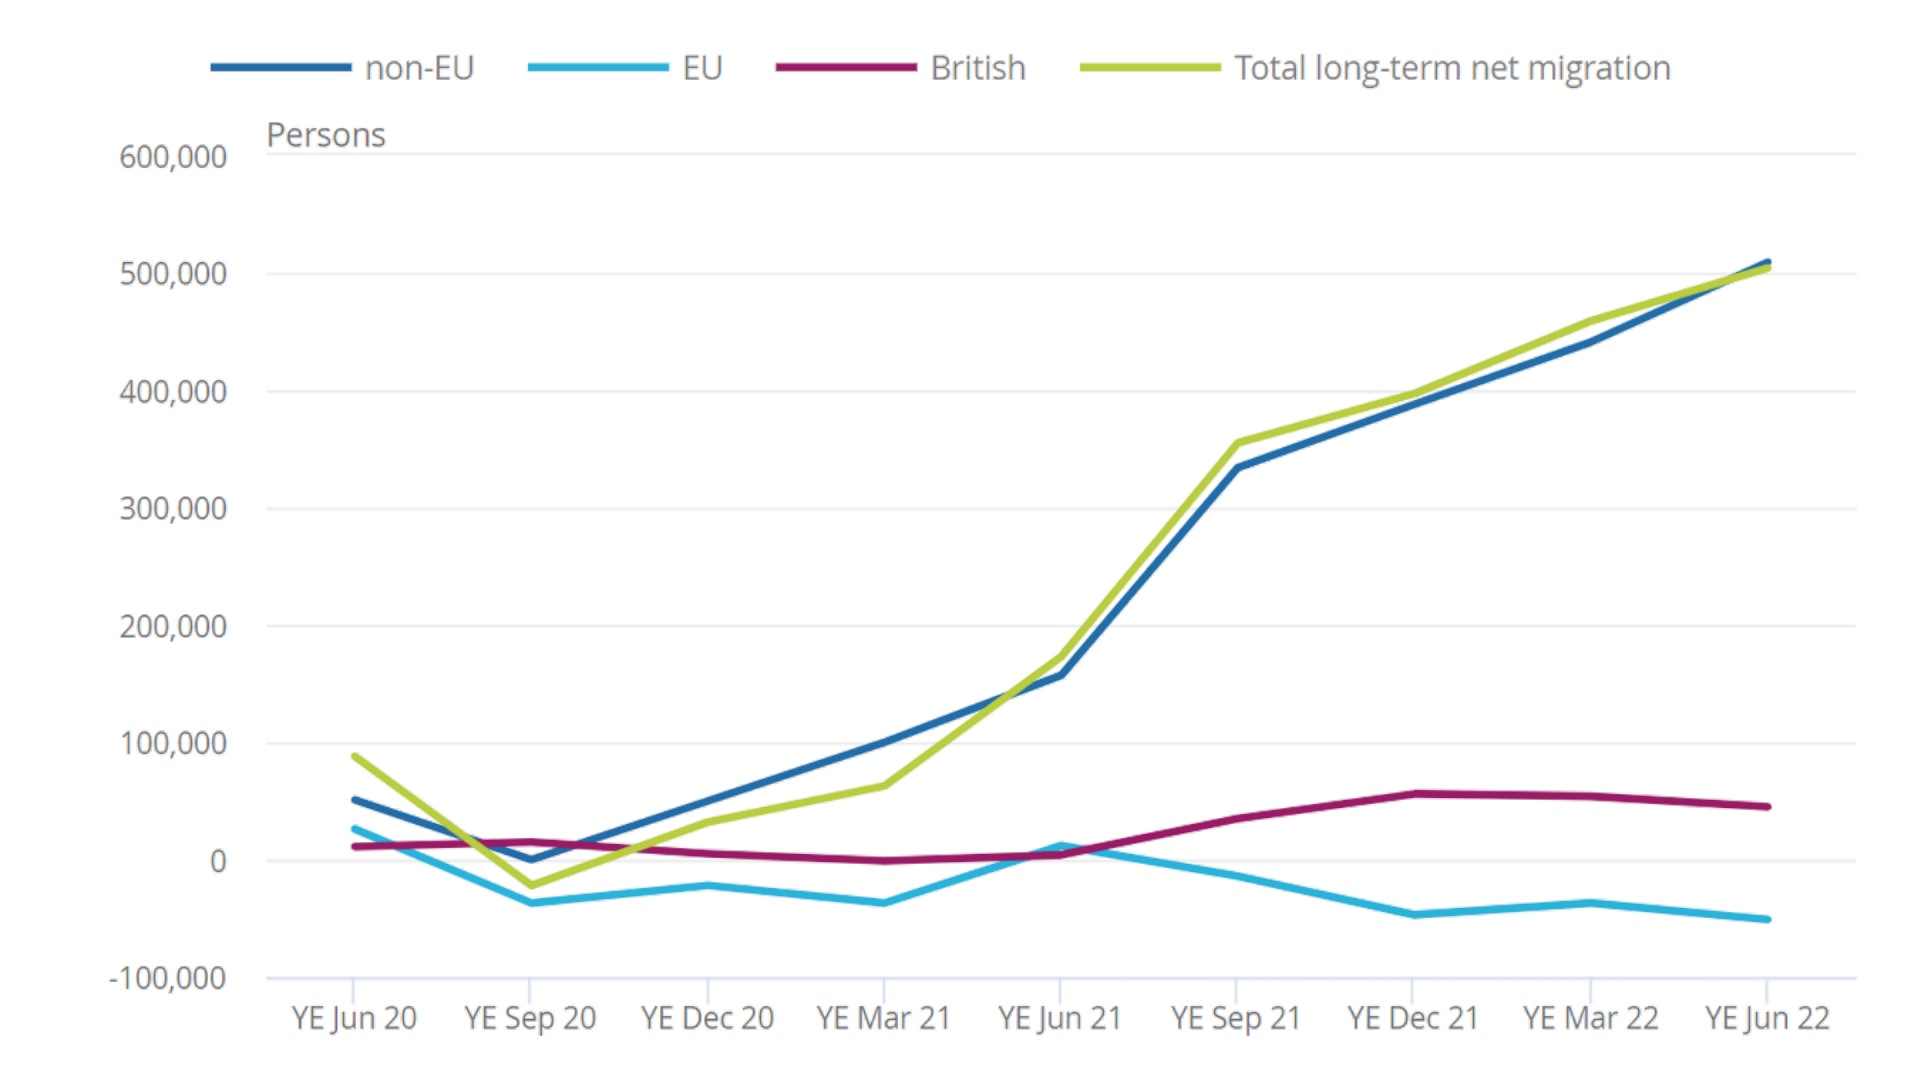 Net migration of non-EU, EU, and British nationals in the UK, between the year ending June 2020 and the year ending June 2022